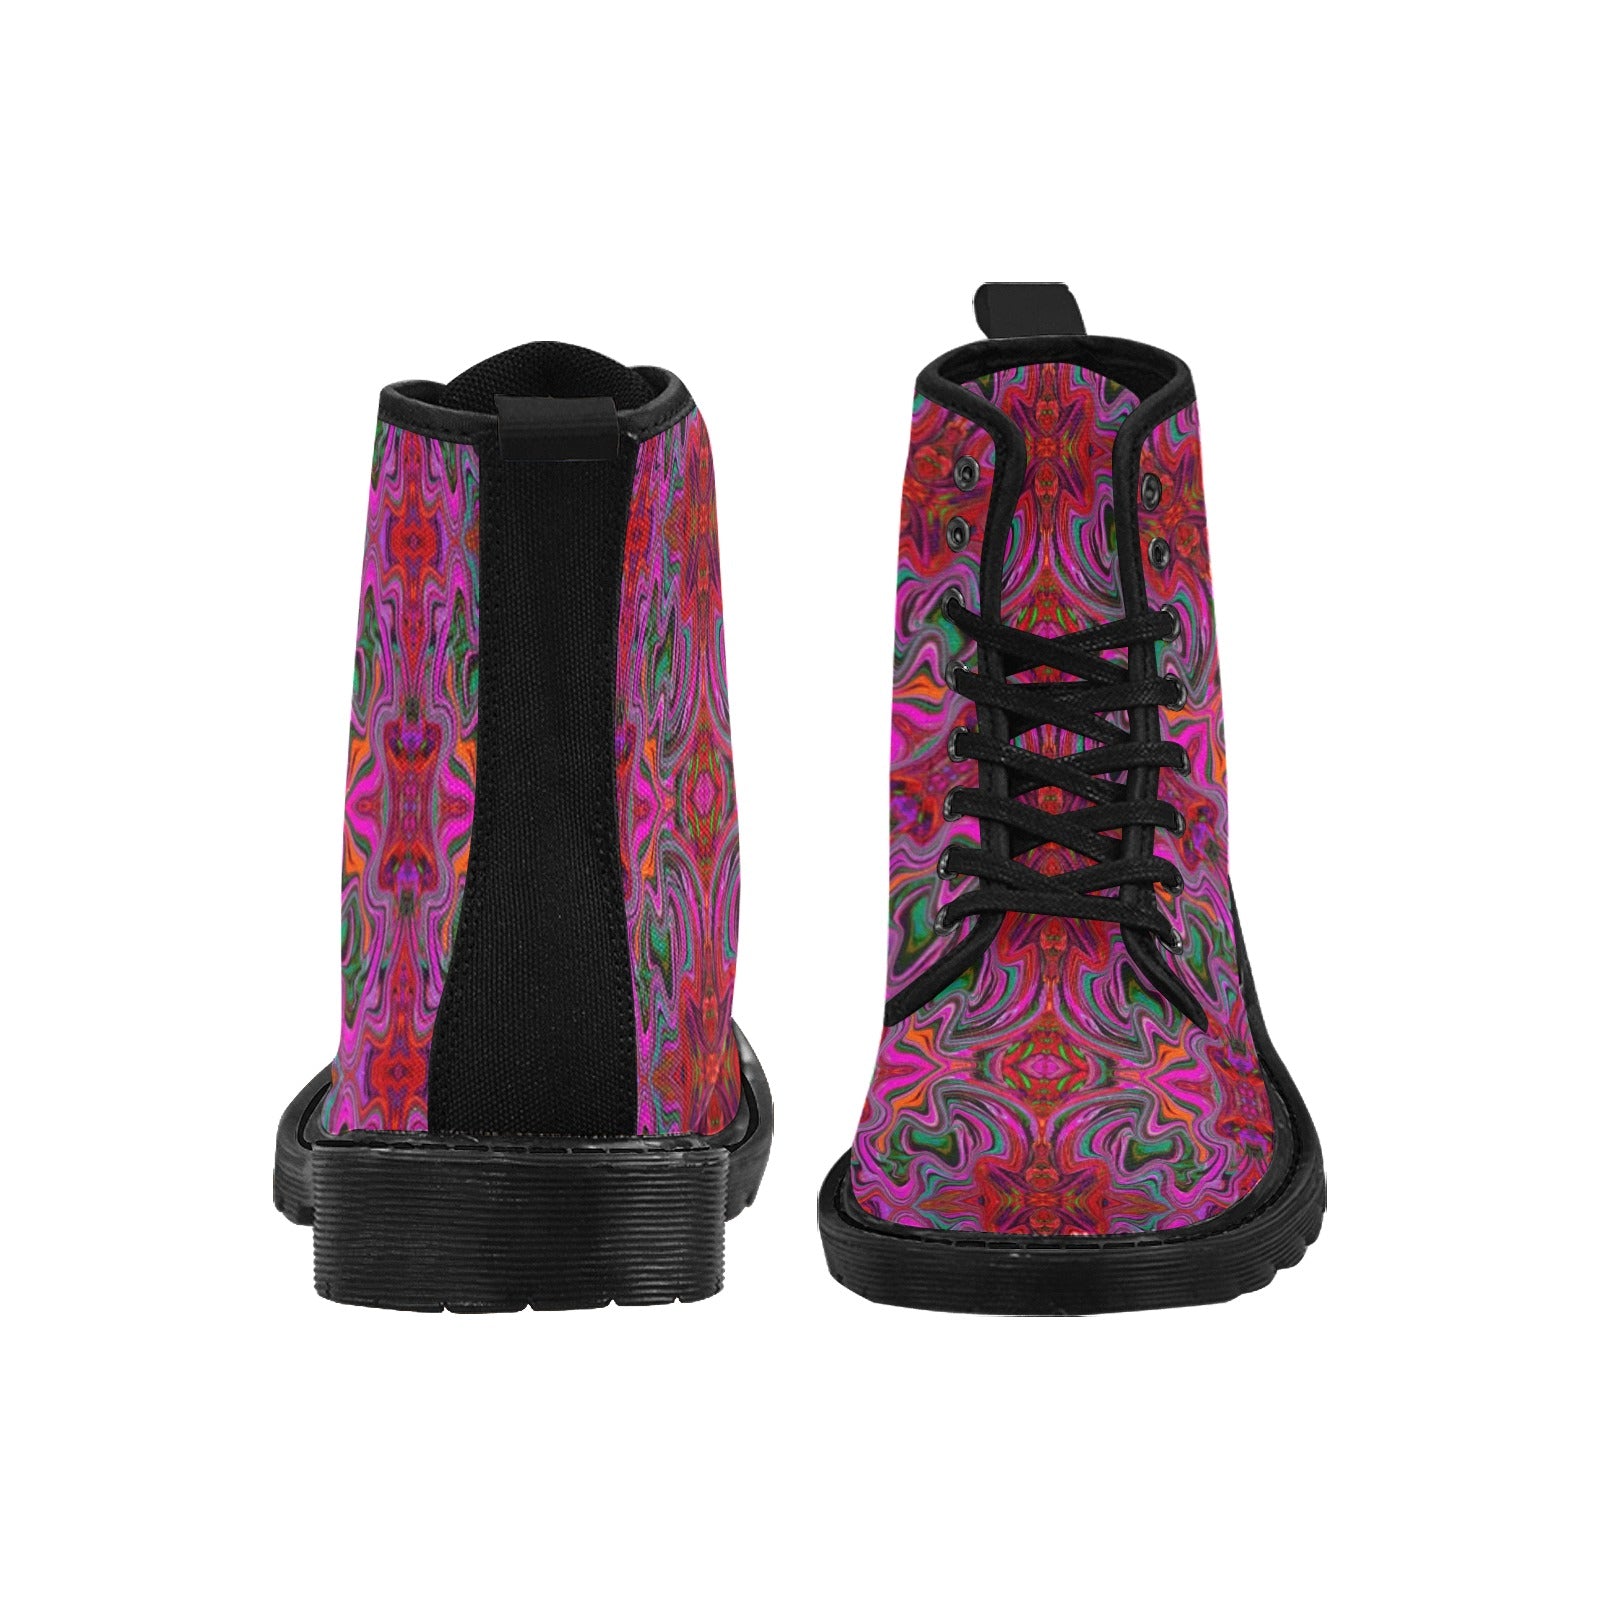 Boots for Women, Cool Trippy Magenta, Red and Green Wavy Pattern - Black